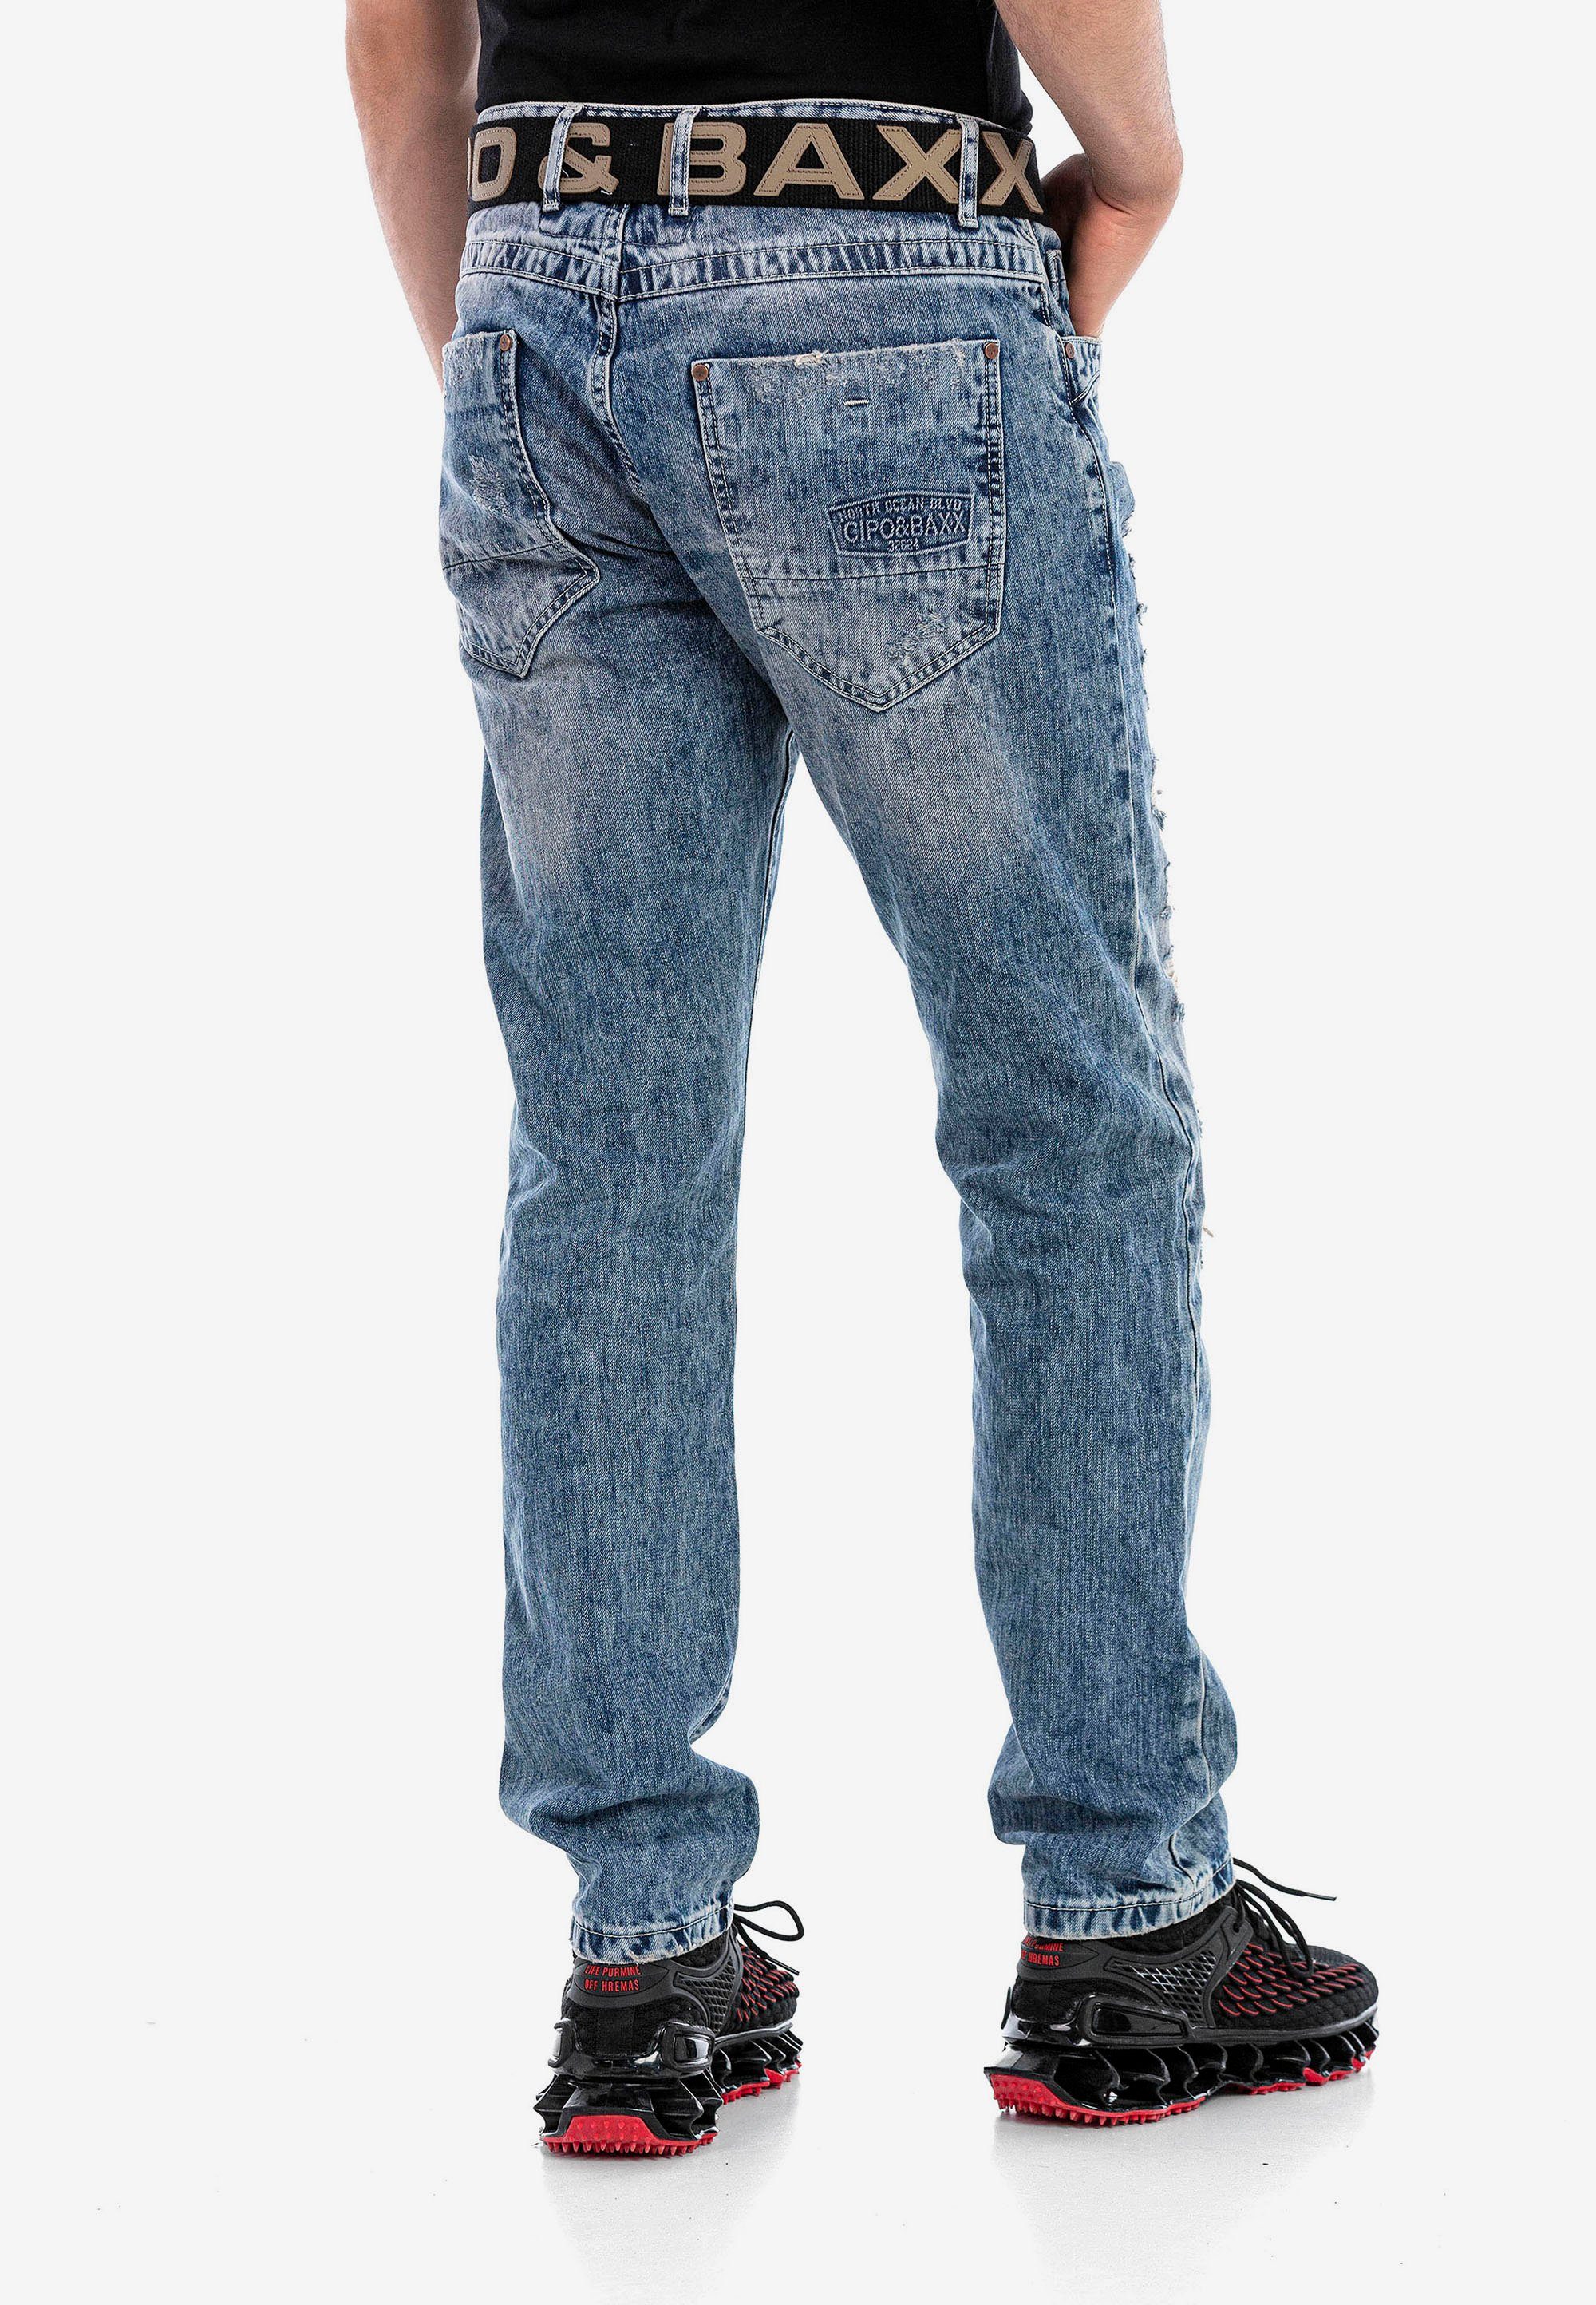 Cipo & Jeans Baxx in mit Bequeme Details Straight-Fit Ripped